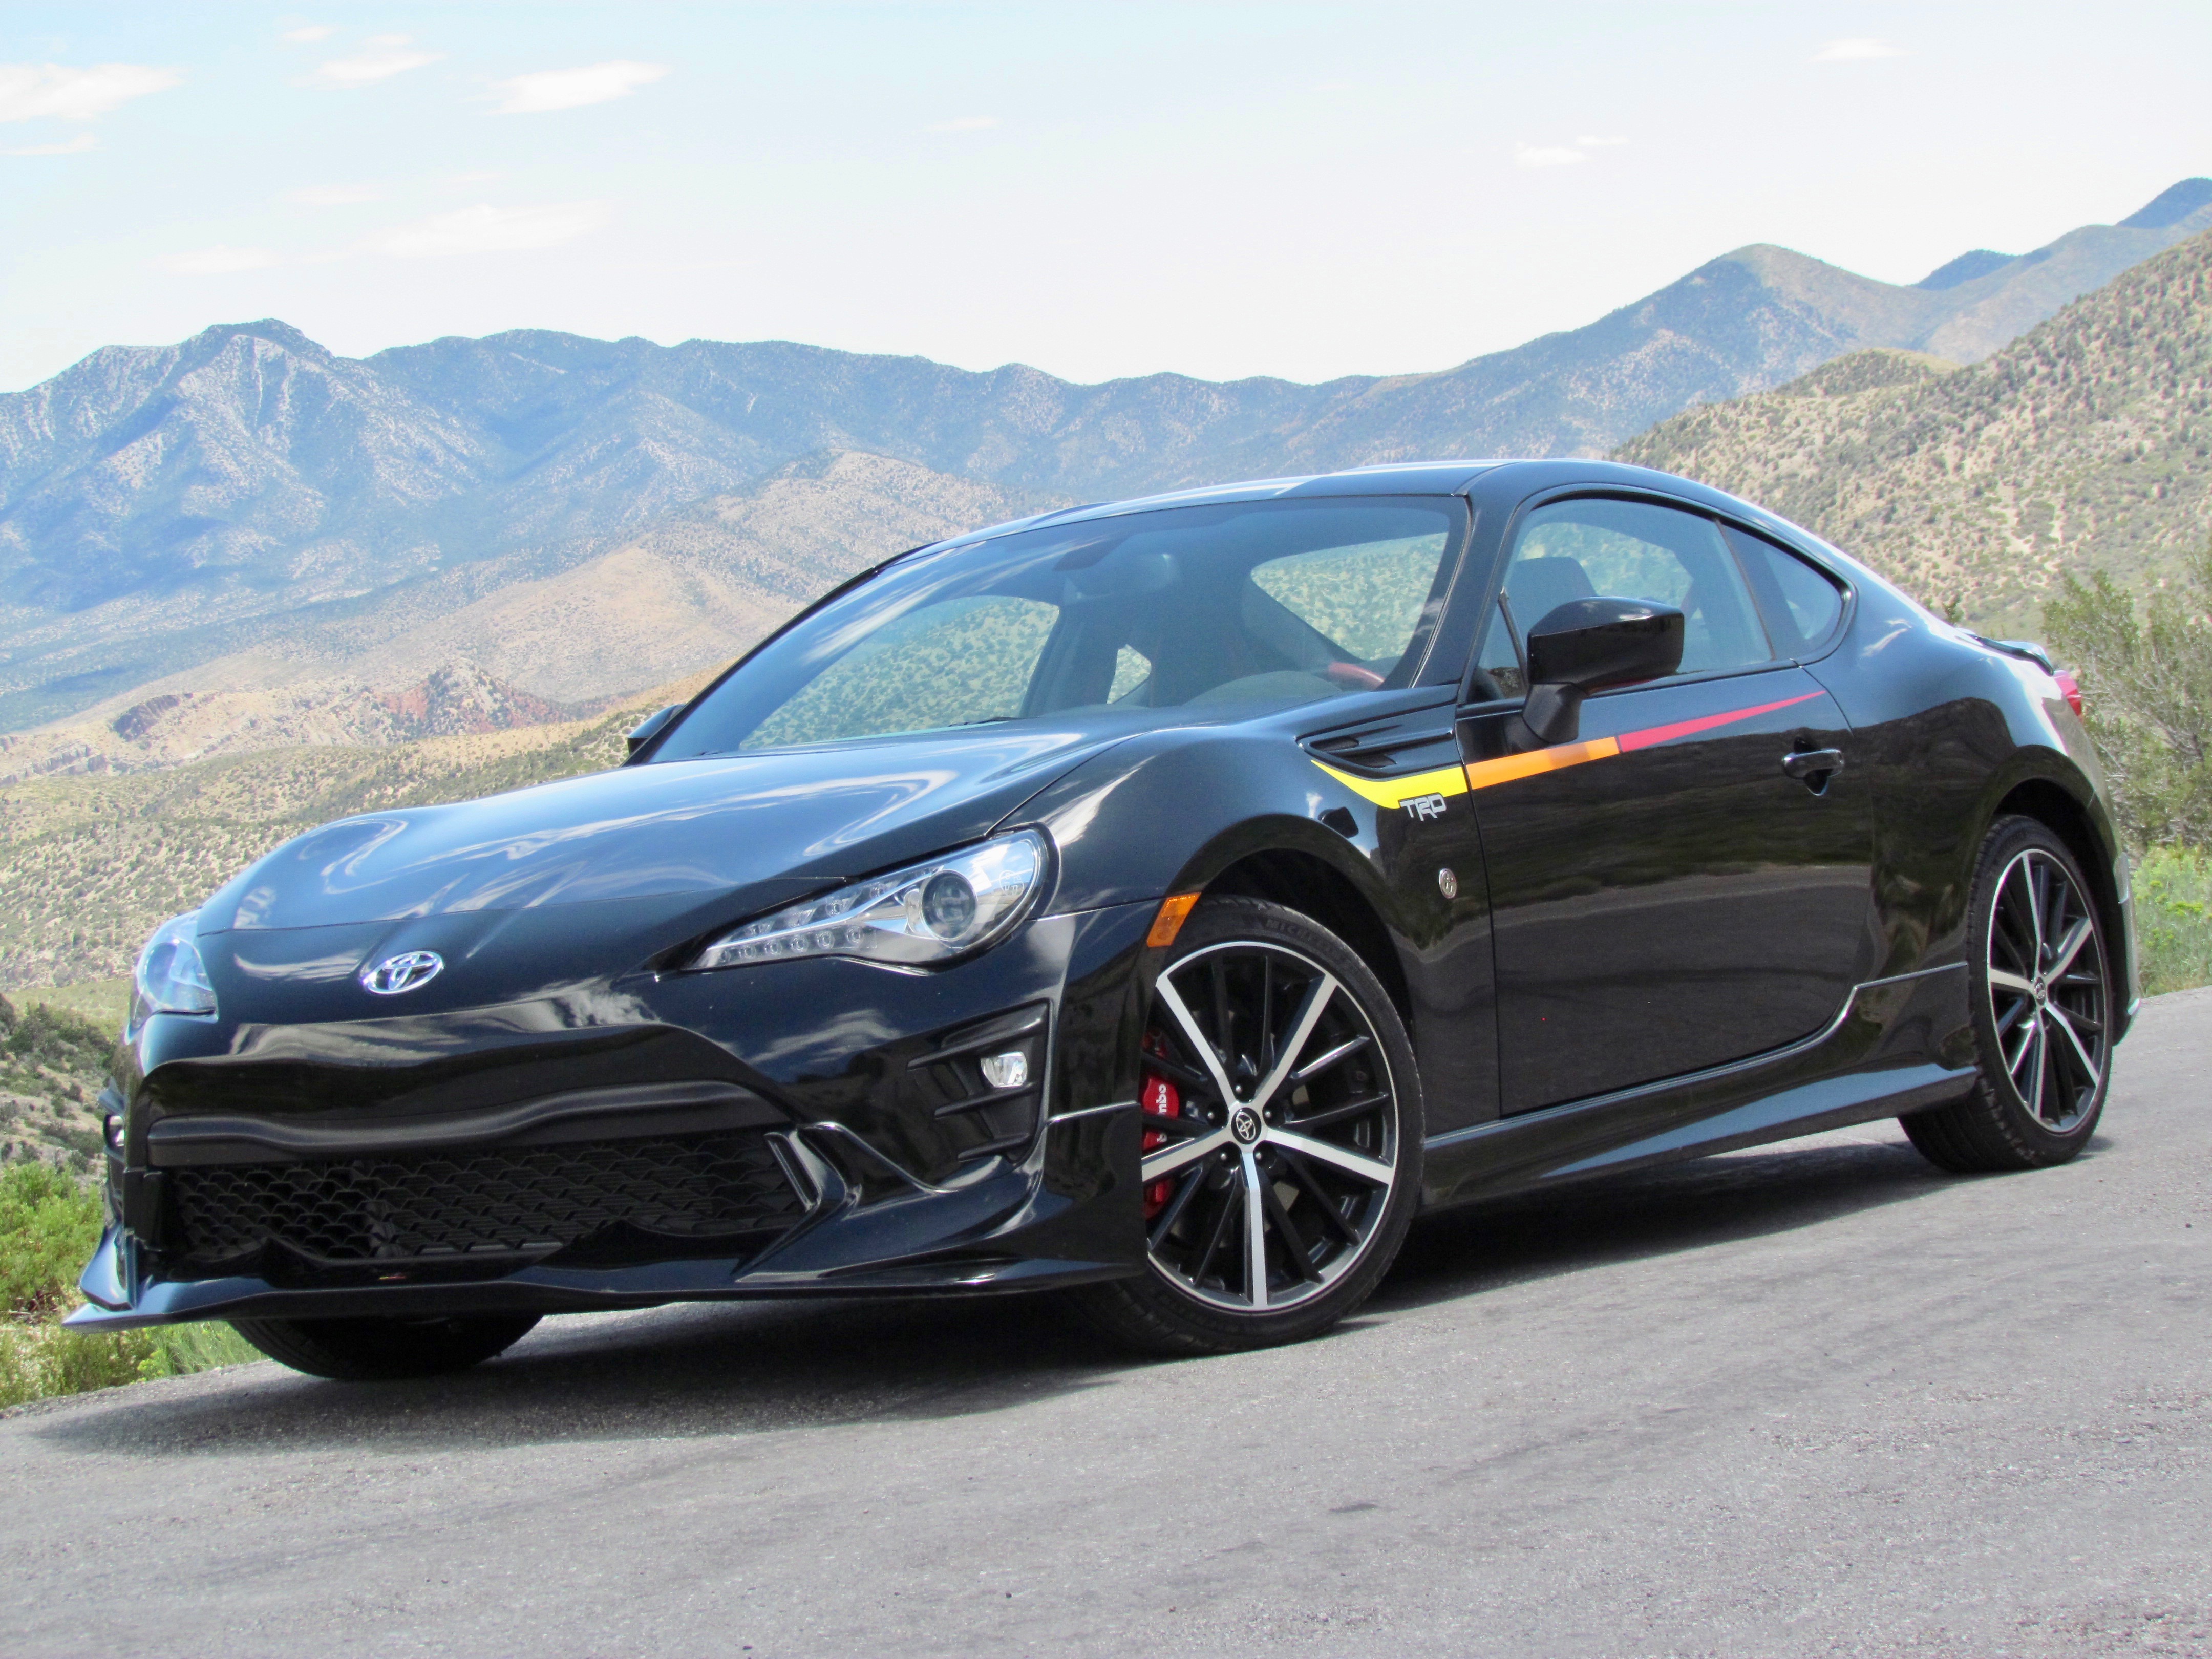 Driven 6 Speed Manual Spices The Drive In Toyota S 86 Trd